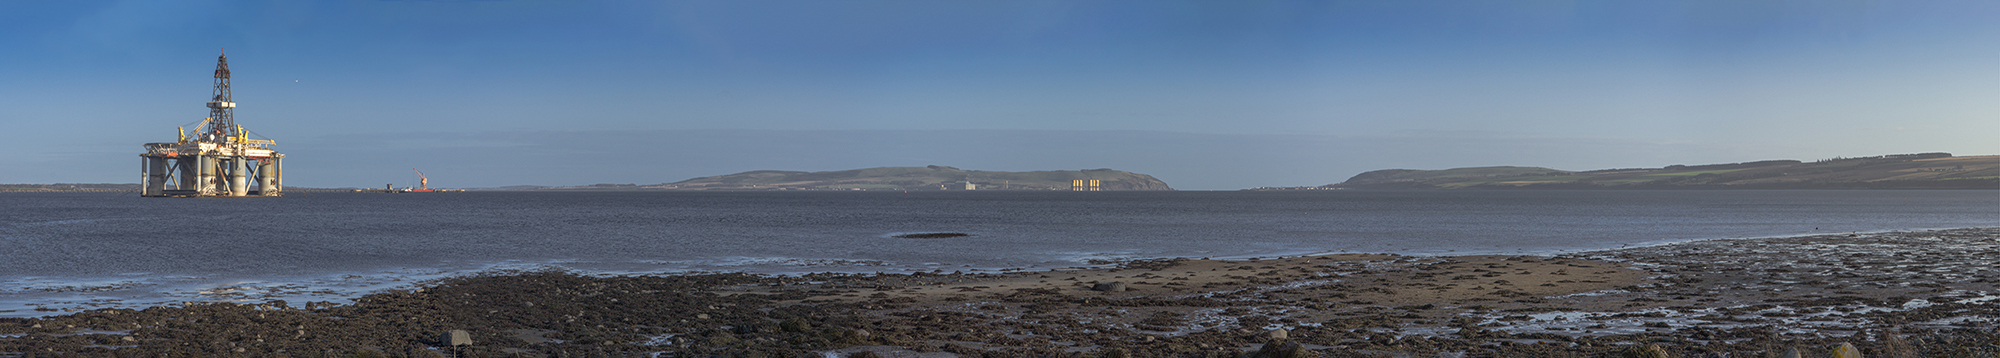 Oil Rigs in the Cromarty Firth